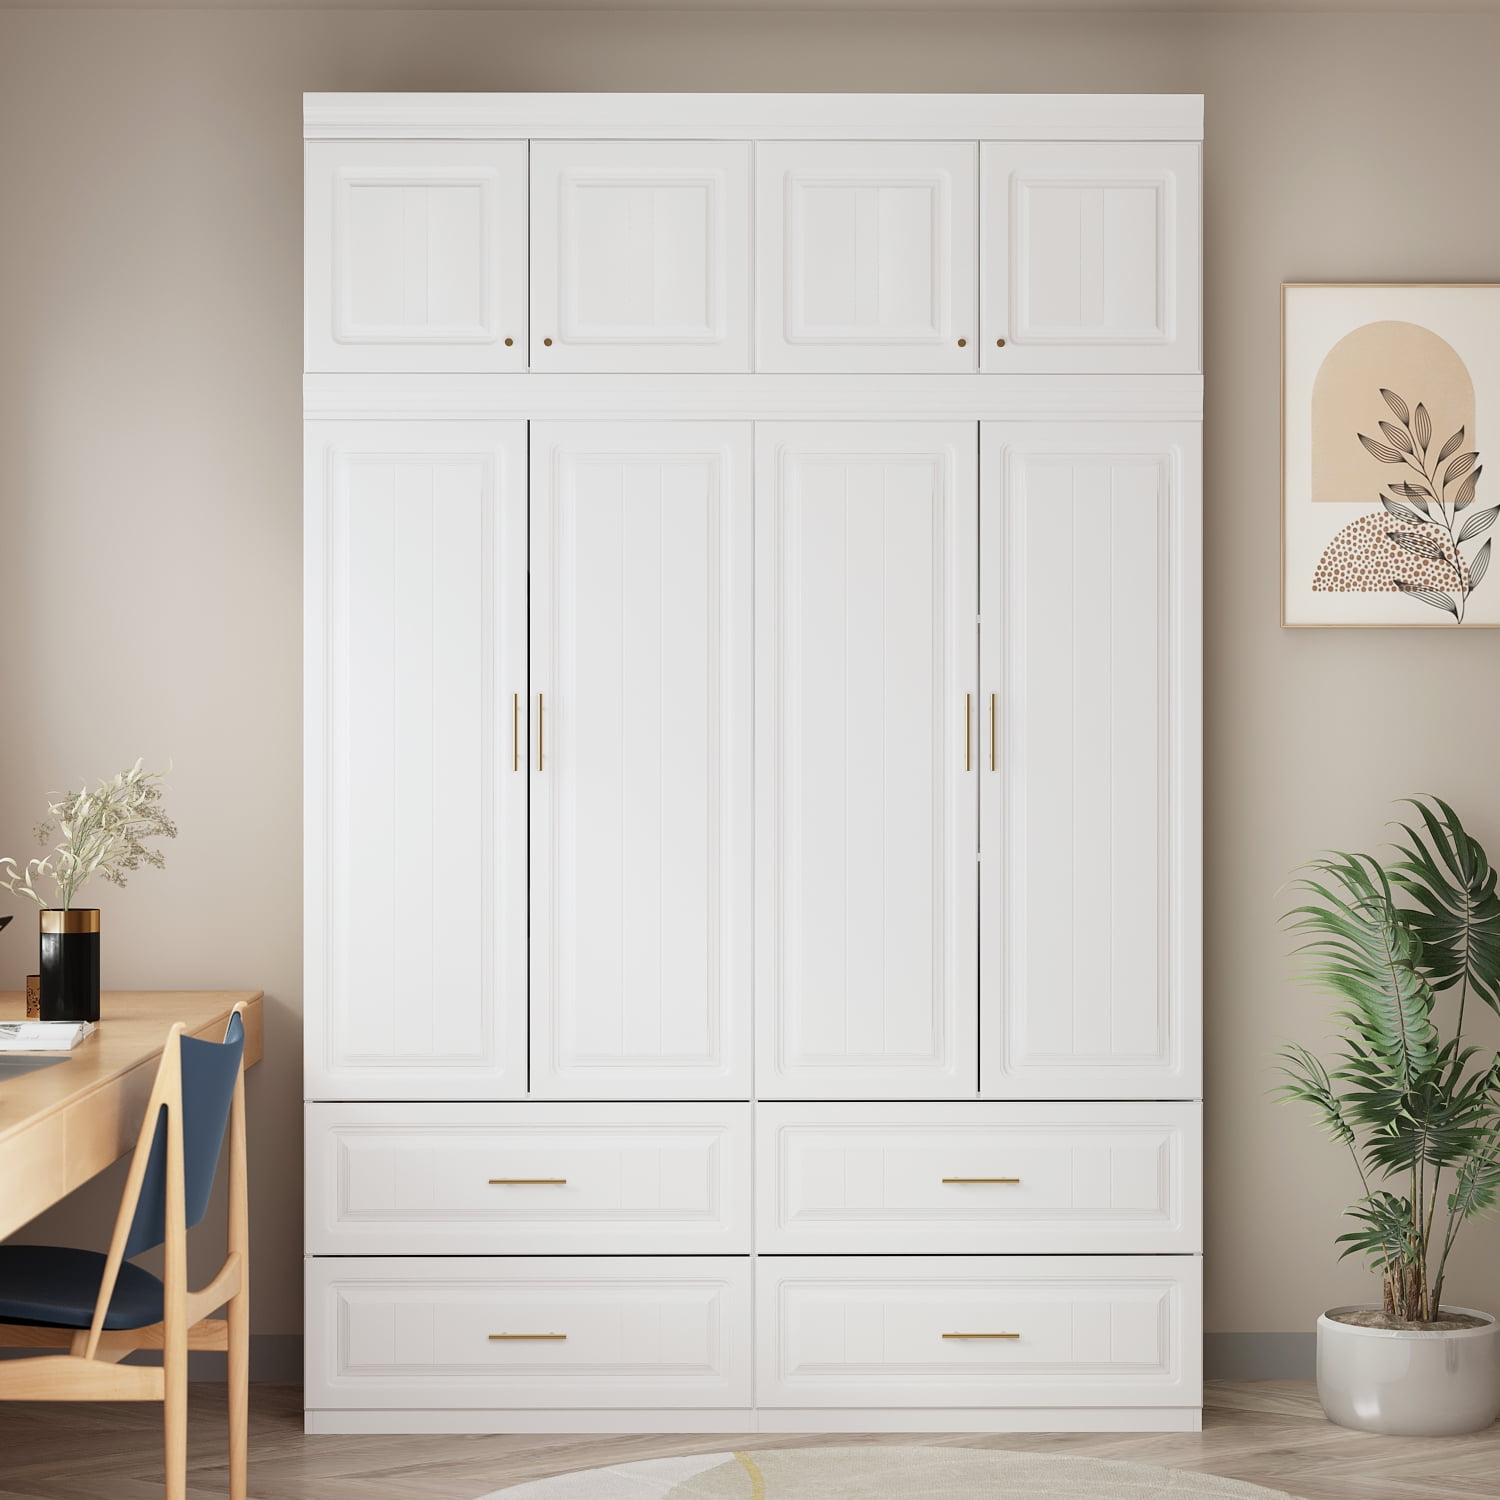 Hitow 4-Door Wardrobe Armoire with Hutch, Shelves and Drawers,White Closet  Storage Cabinet with Clothing Rod for Bedroom, 93.3 H 